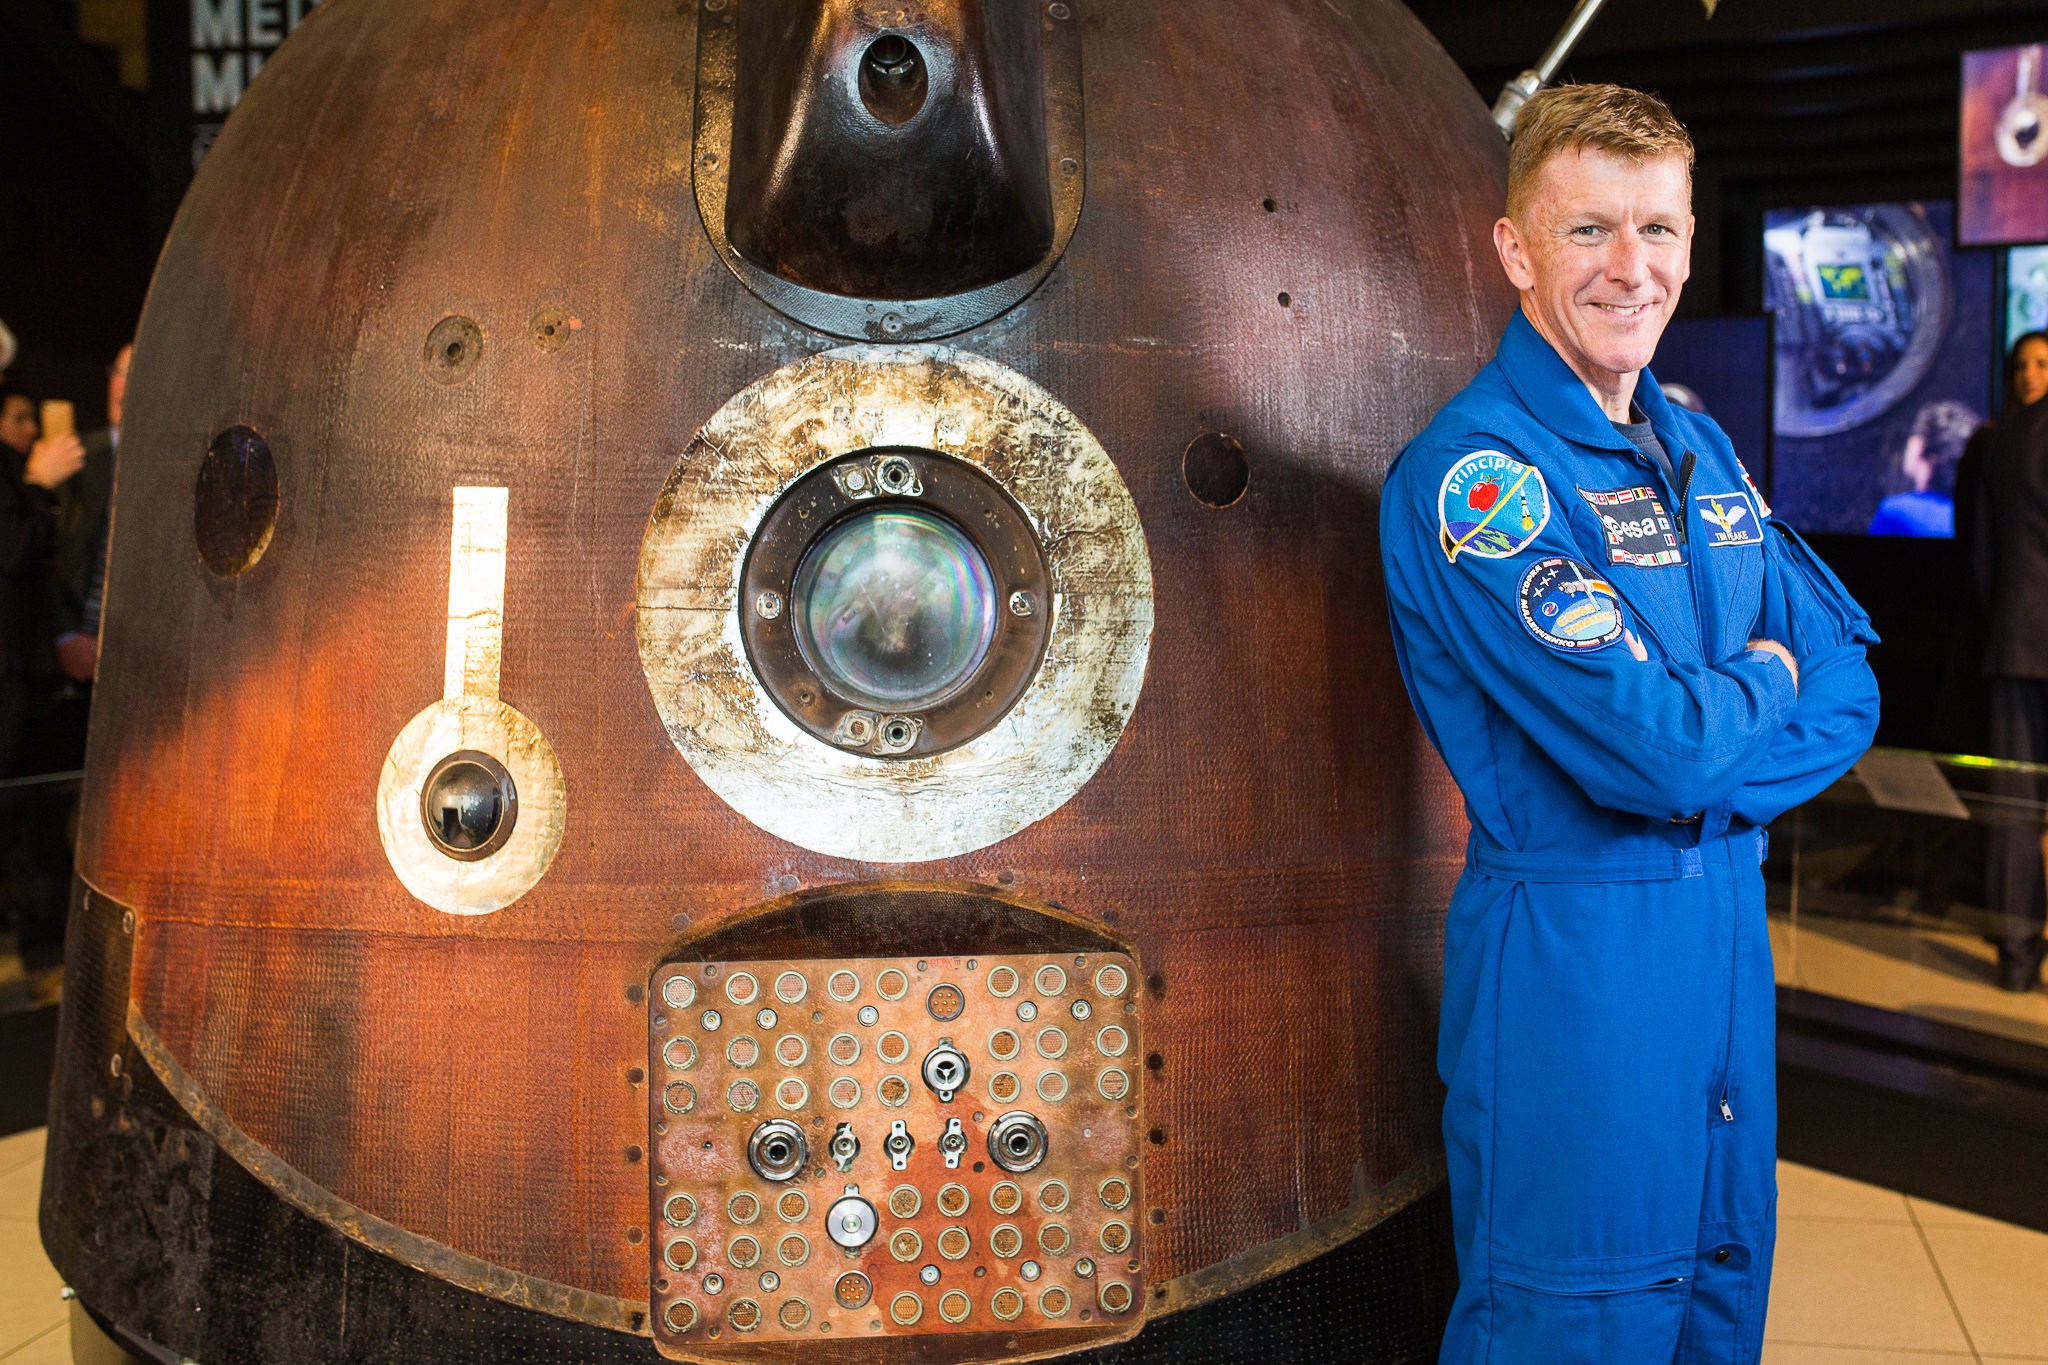 Astronaut Tim Peake with the Soyuz spacecraft at the National Science and Media Museum in Bradford © National Science and Media Museum  Jody Hartley small 2.jpg